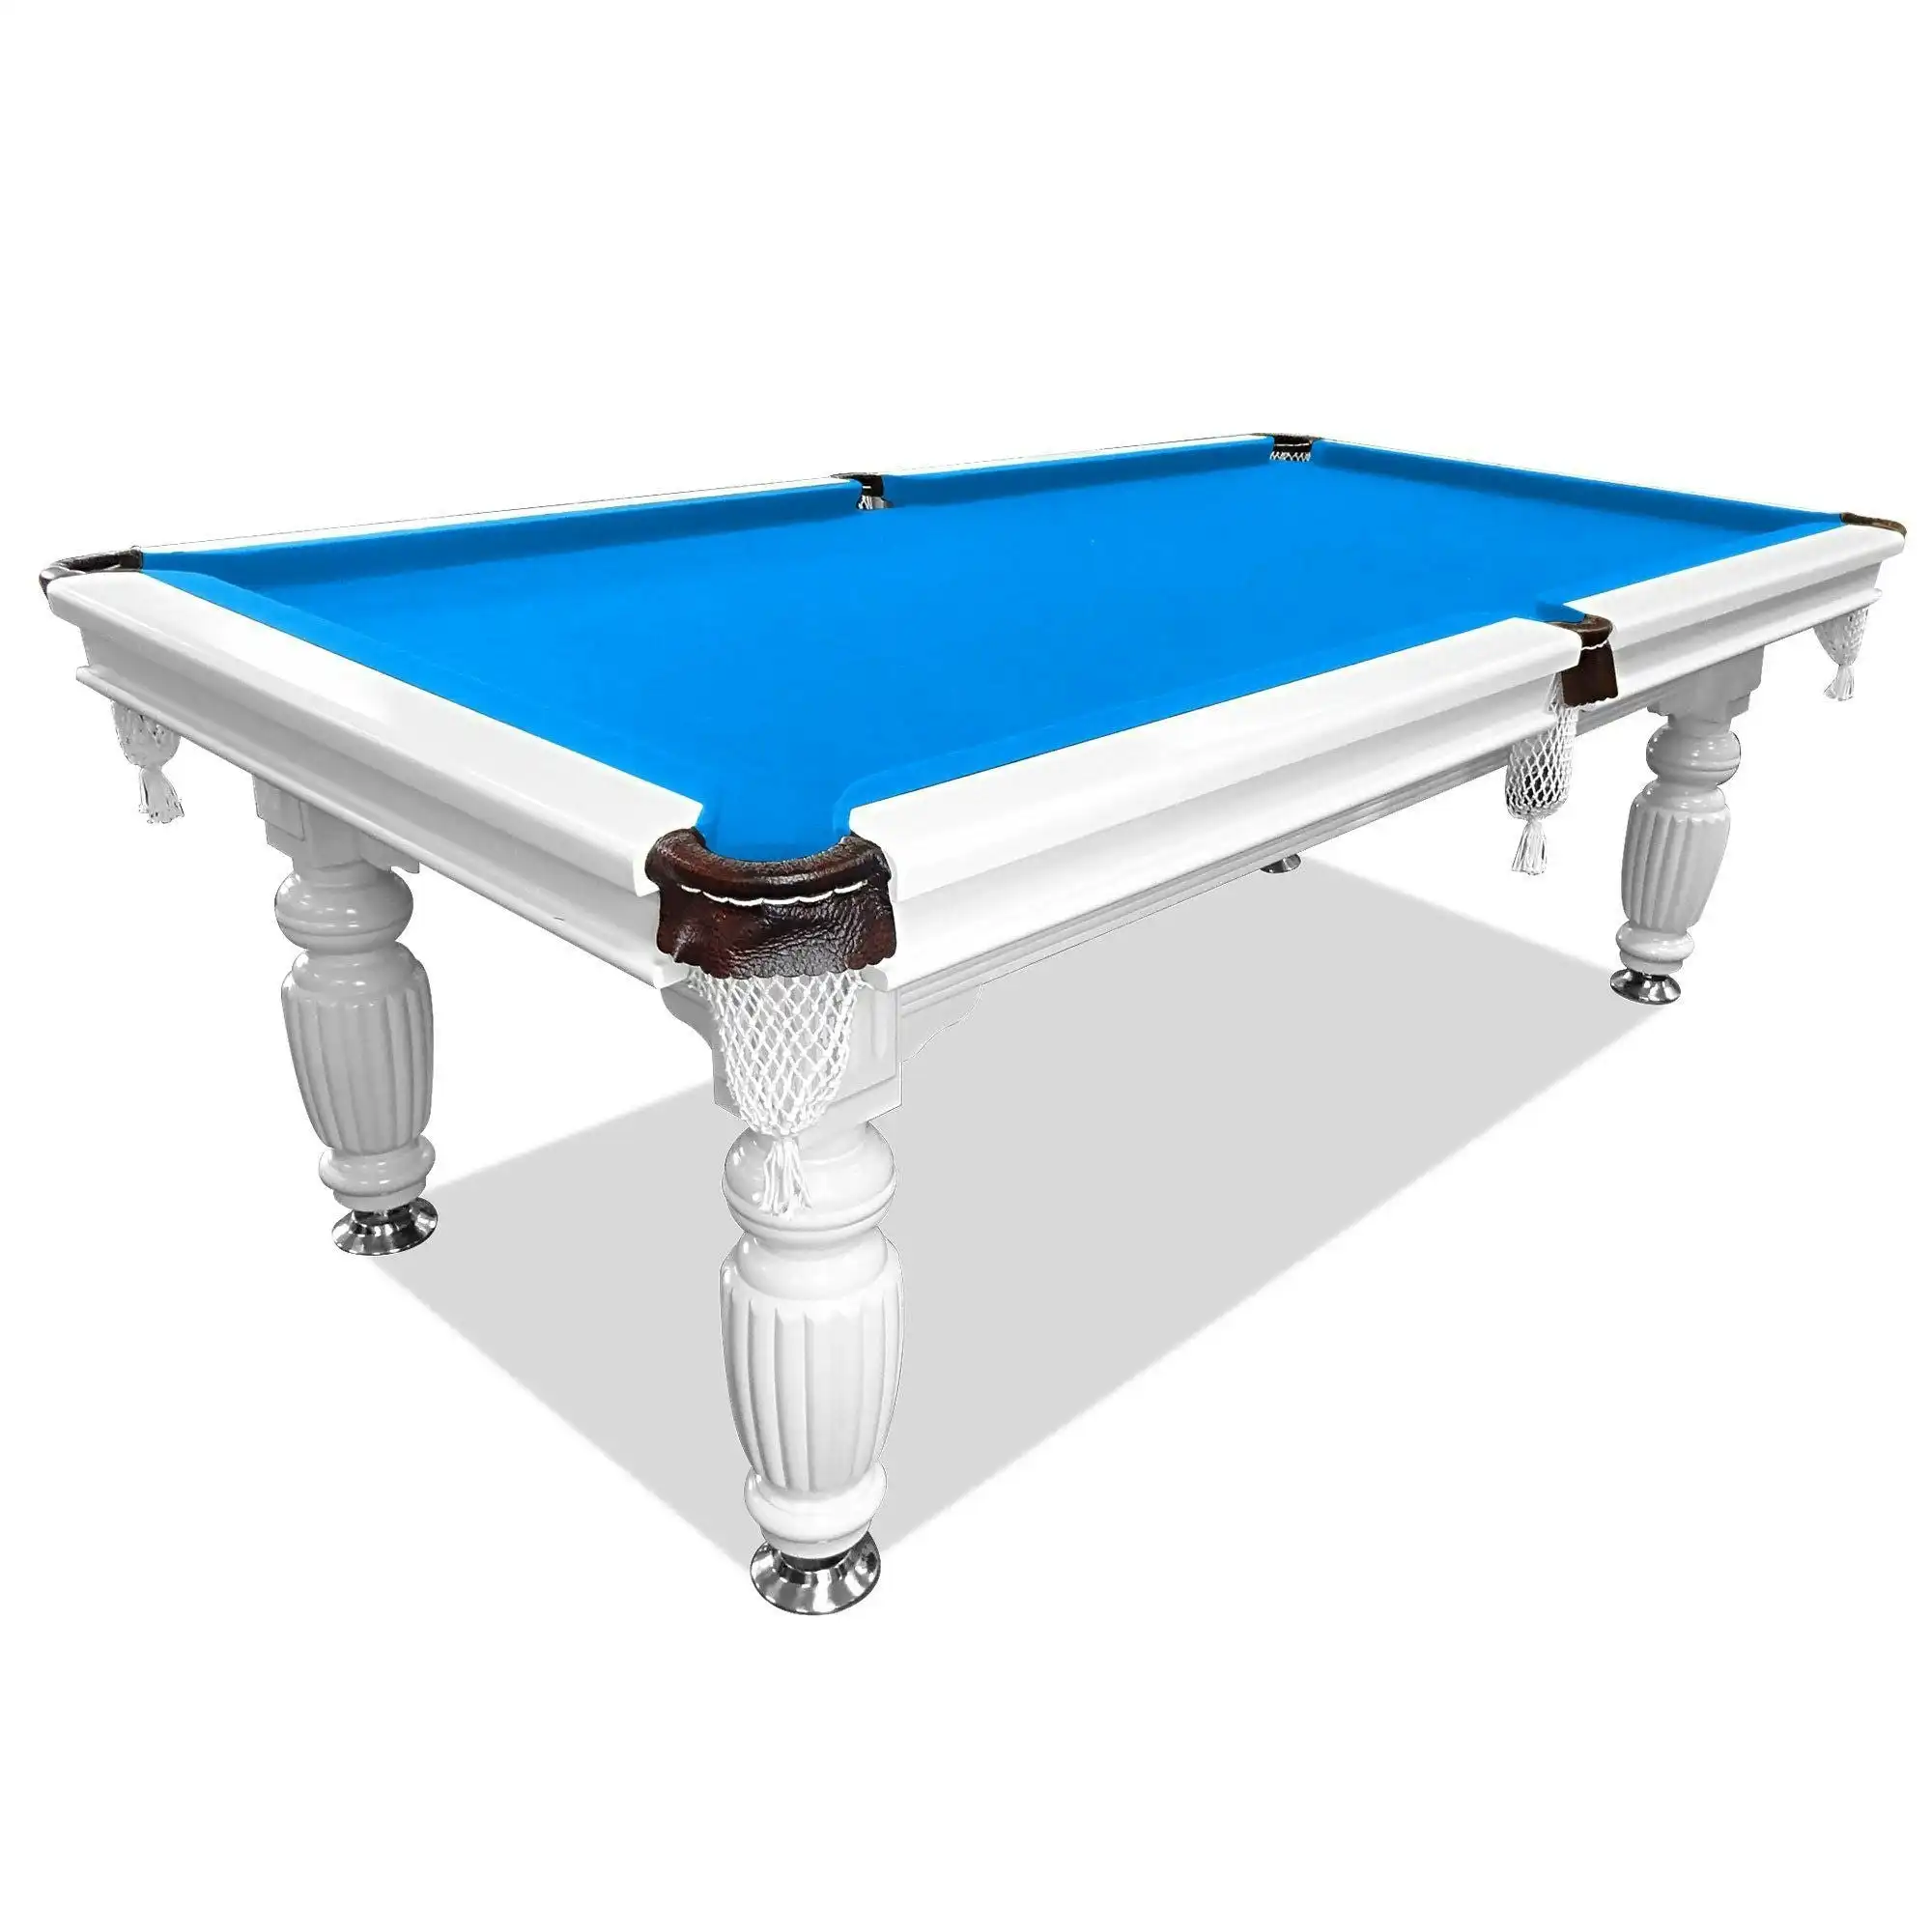 Mace 7FT Luxury Slate Pool Table Solid Timber Billiard Table Professional Snooker Game Table with Accessories Pack,White Frame